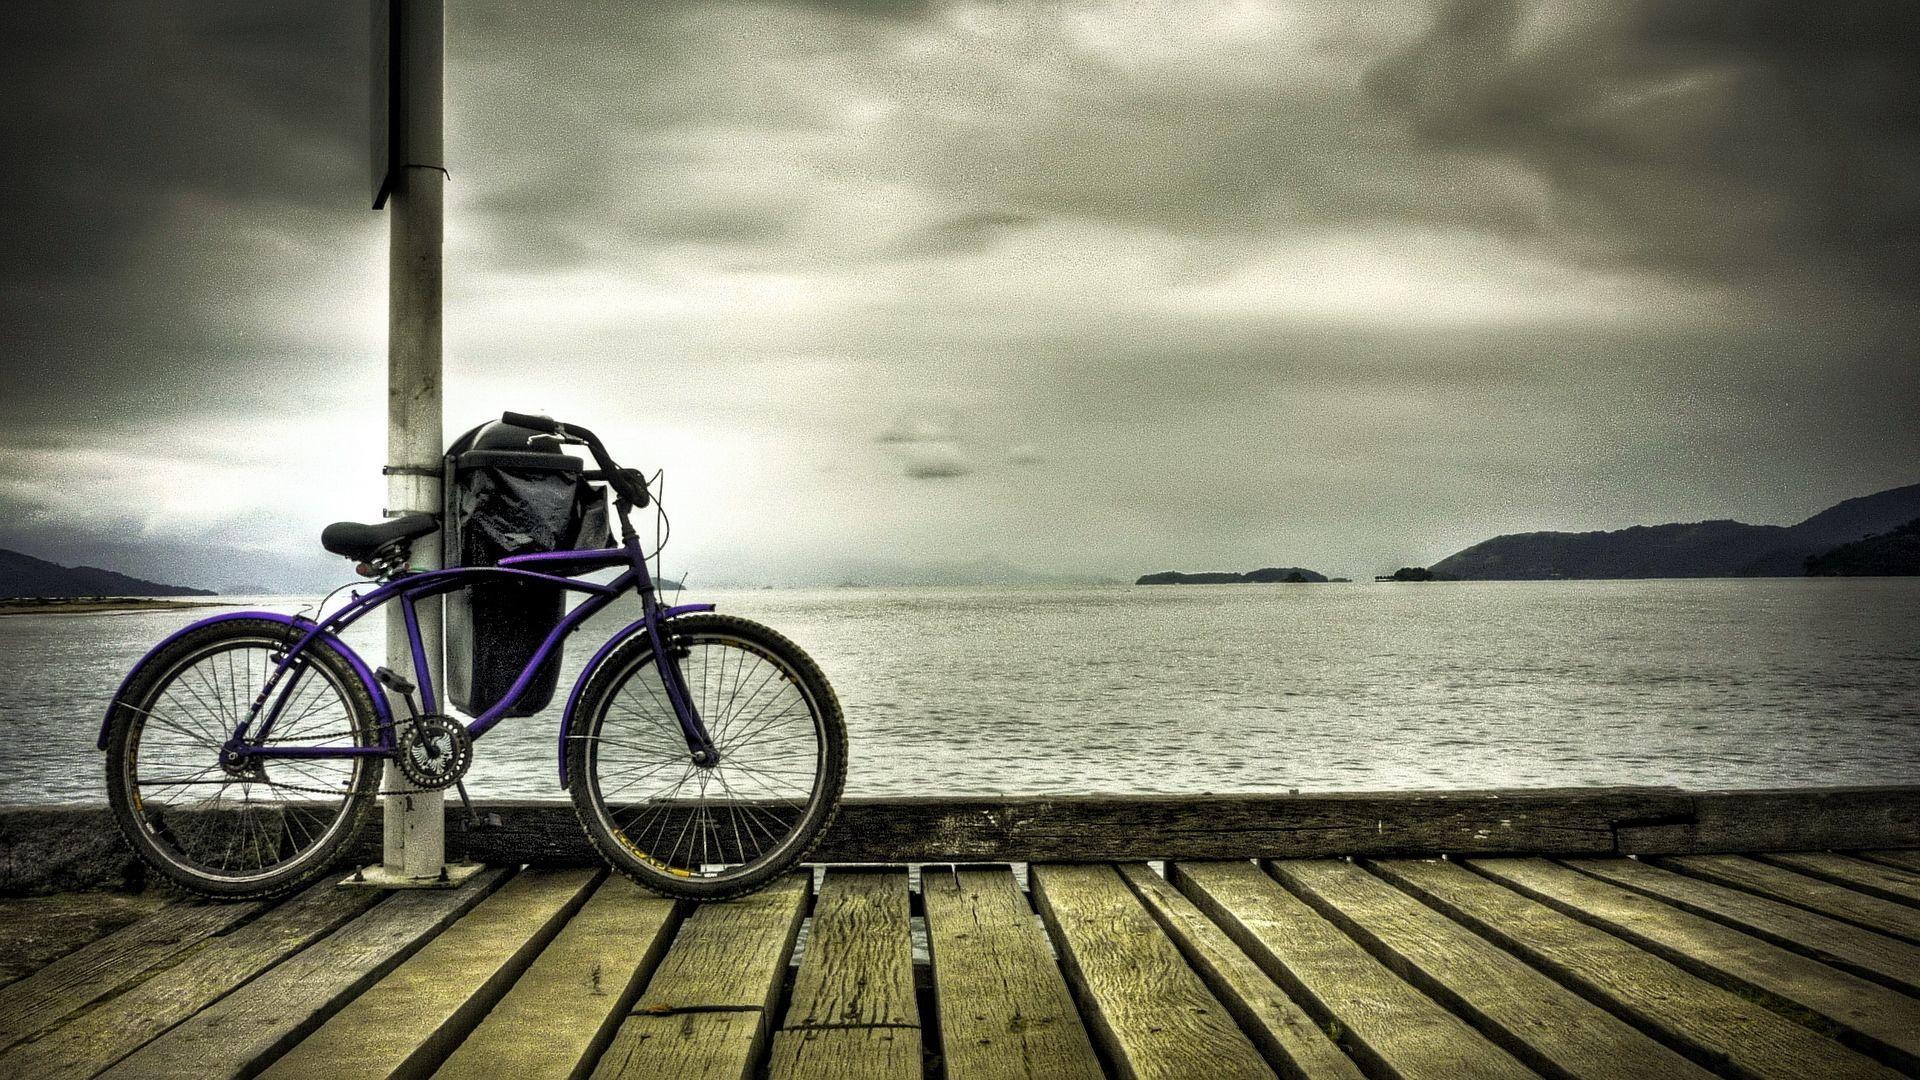 Bicycle Pictures and Wallpapers  Bicycle wallpaper Bicycle pictures  Bicycle